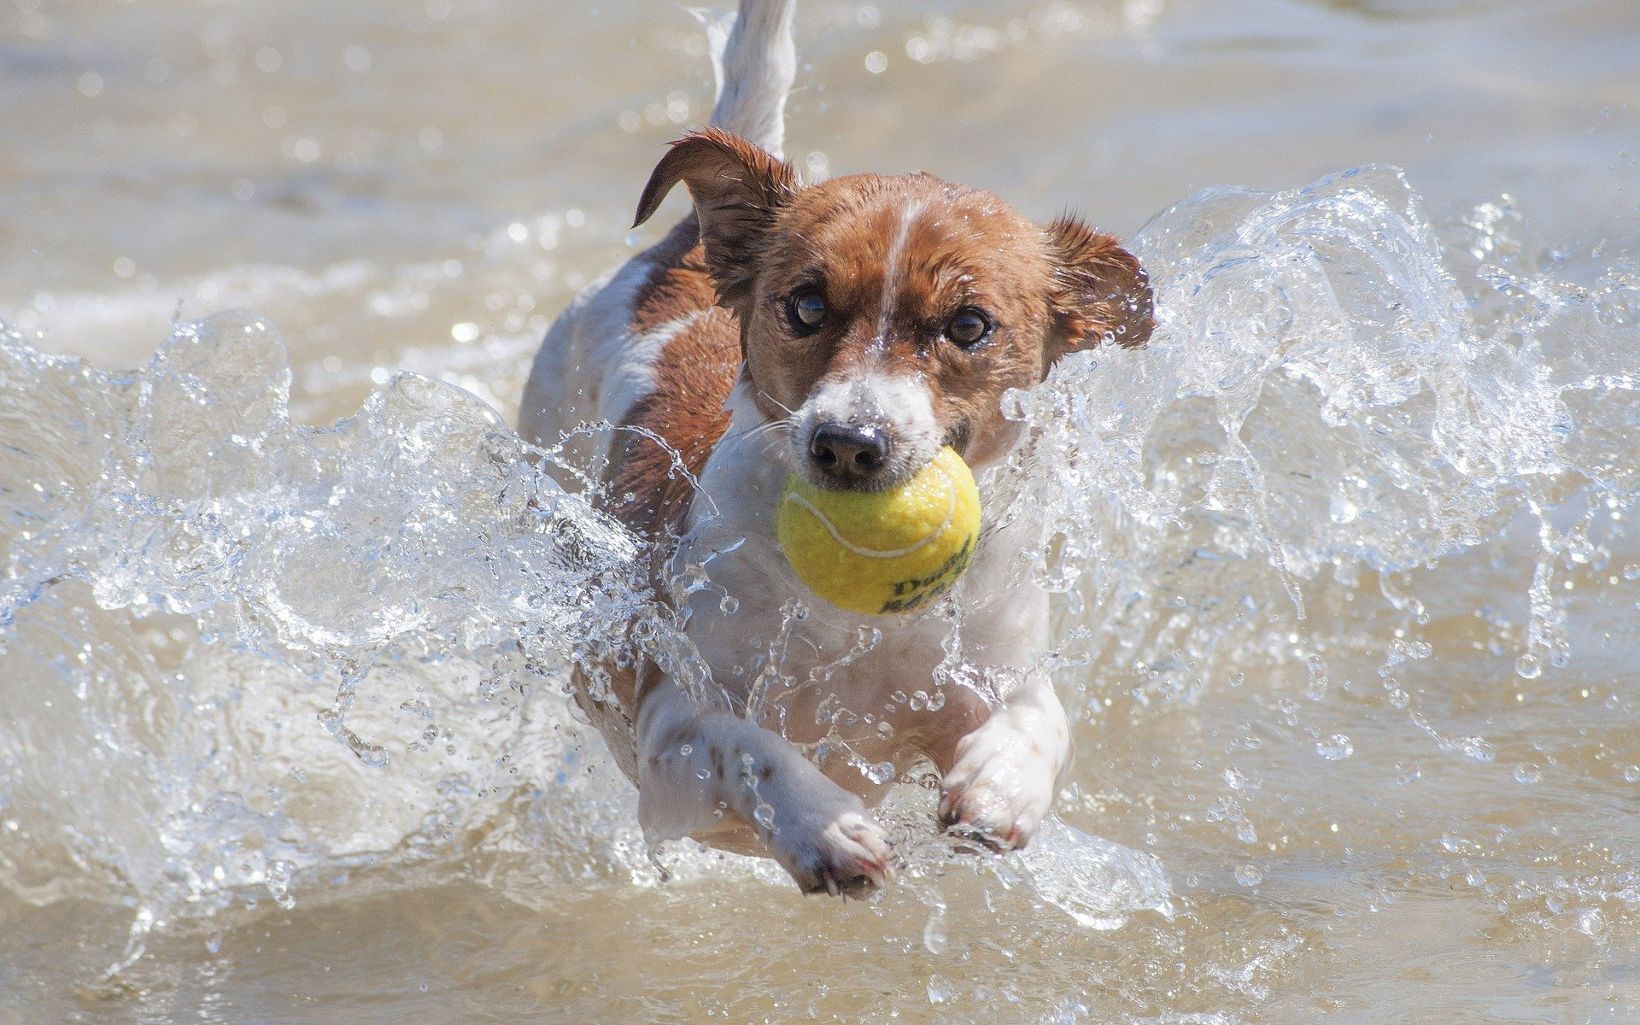 A Jack Russell Terrier bounds out of the water with a tennis ball in its mouth.